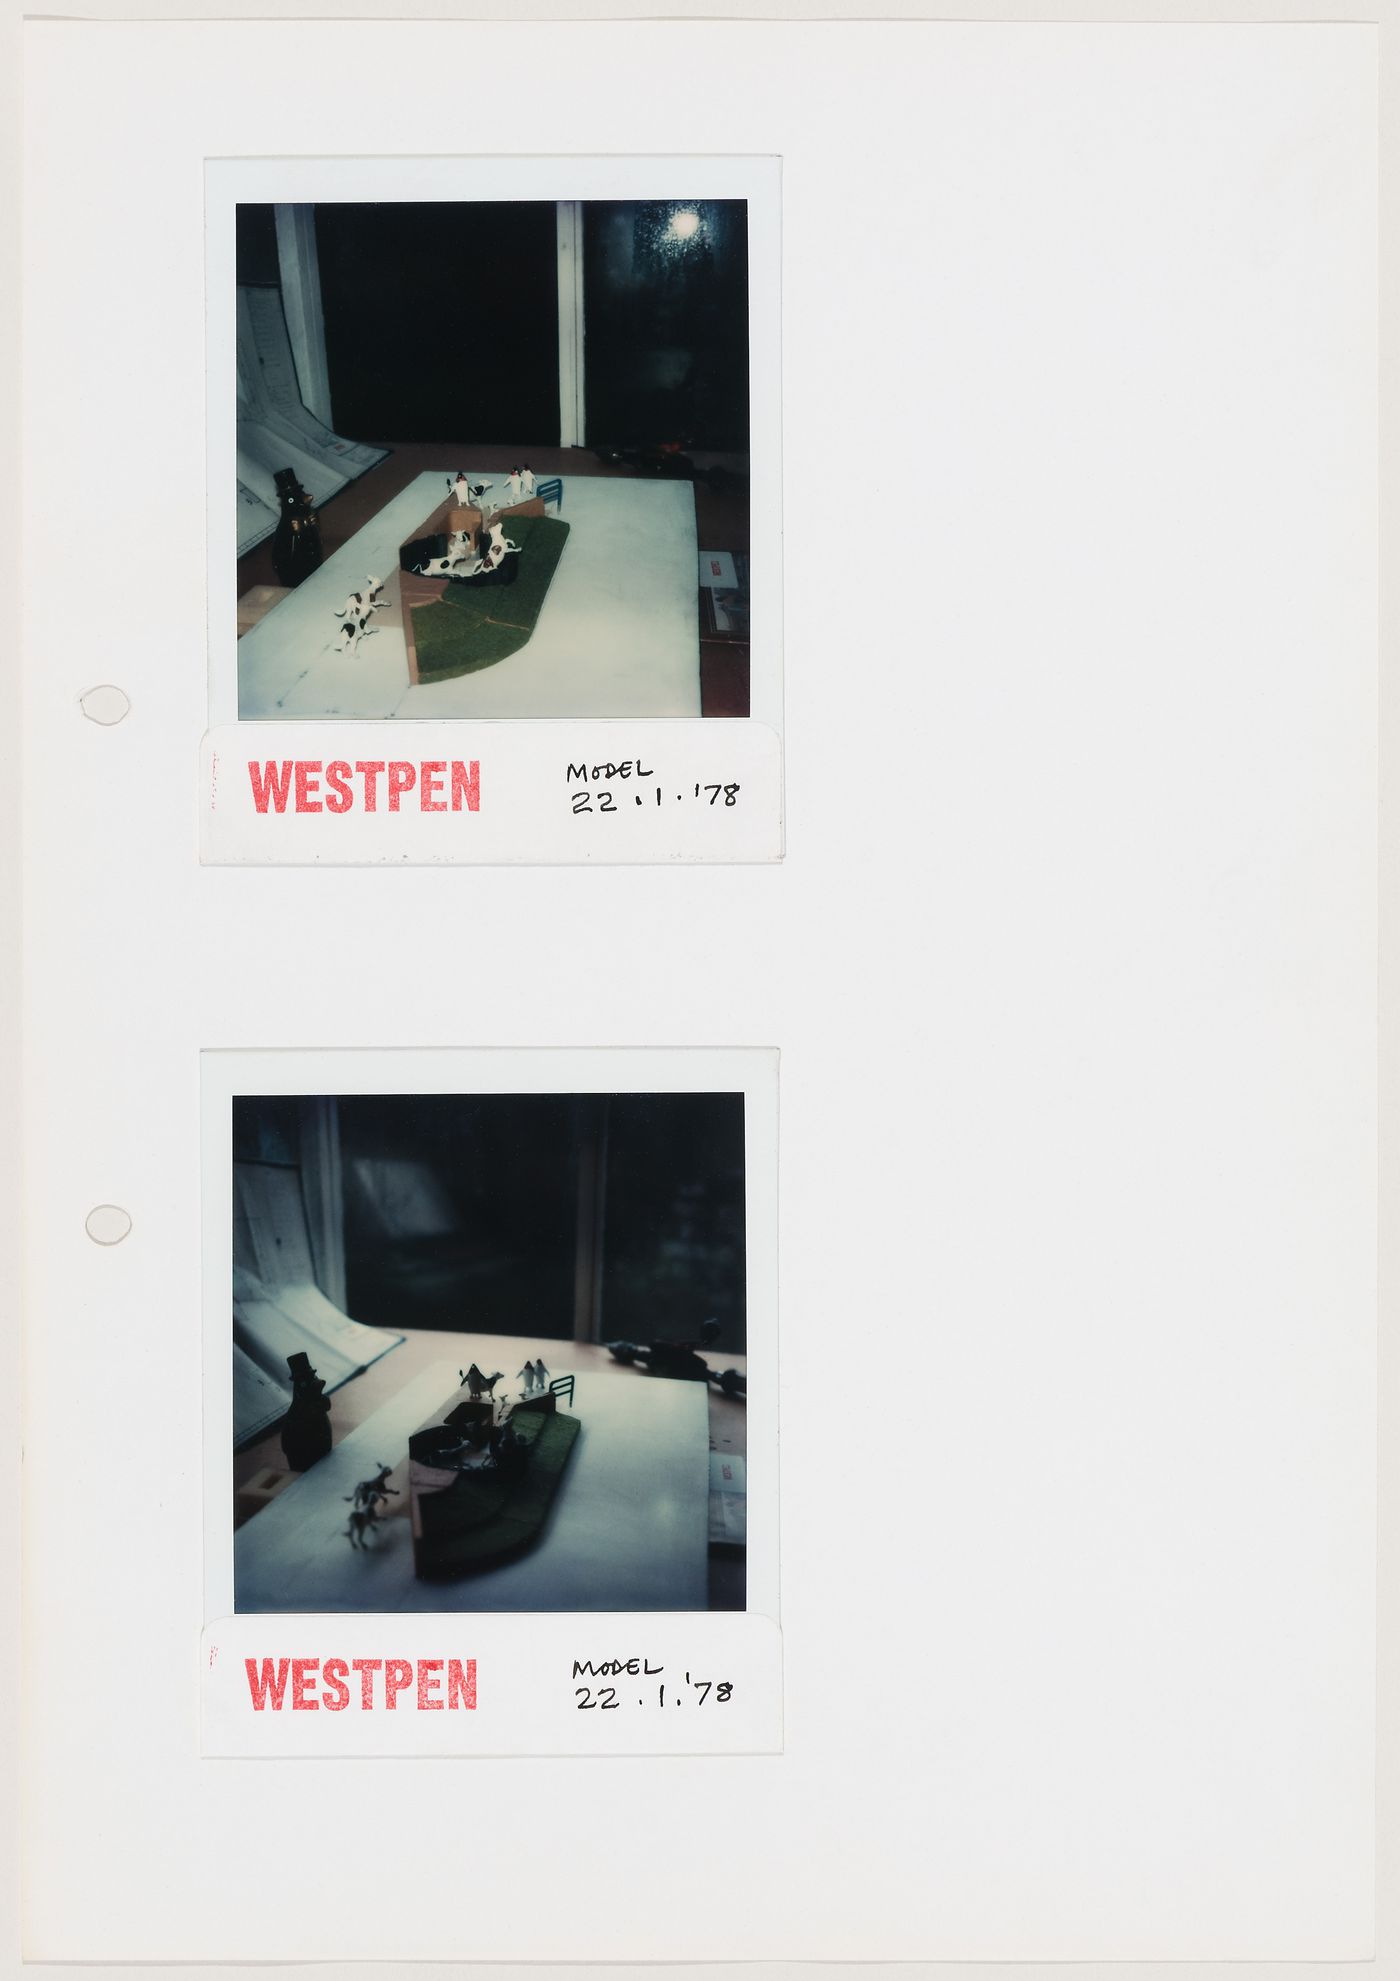 Photographs of a model for a livestock pen (document from the Westpen project records)